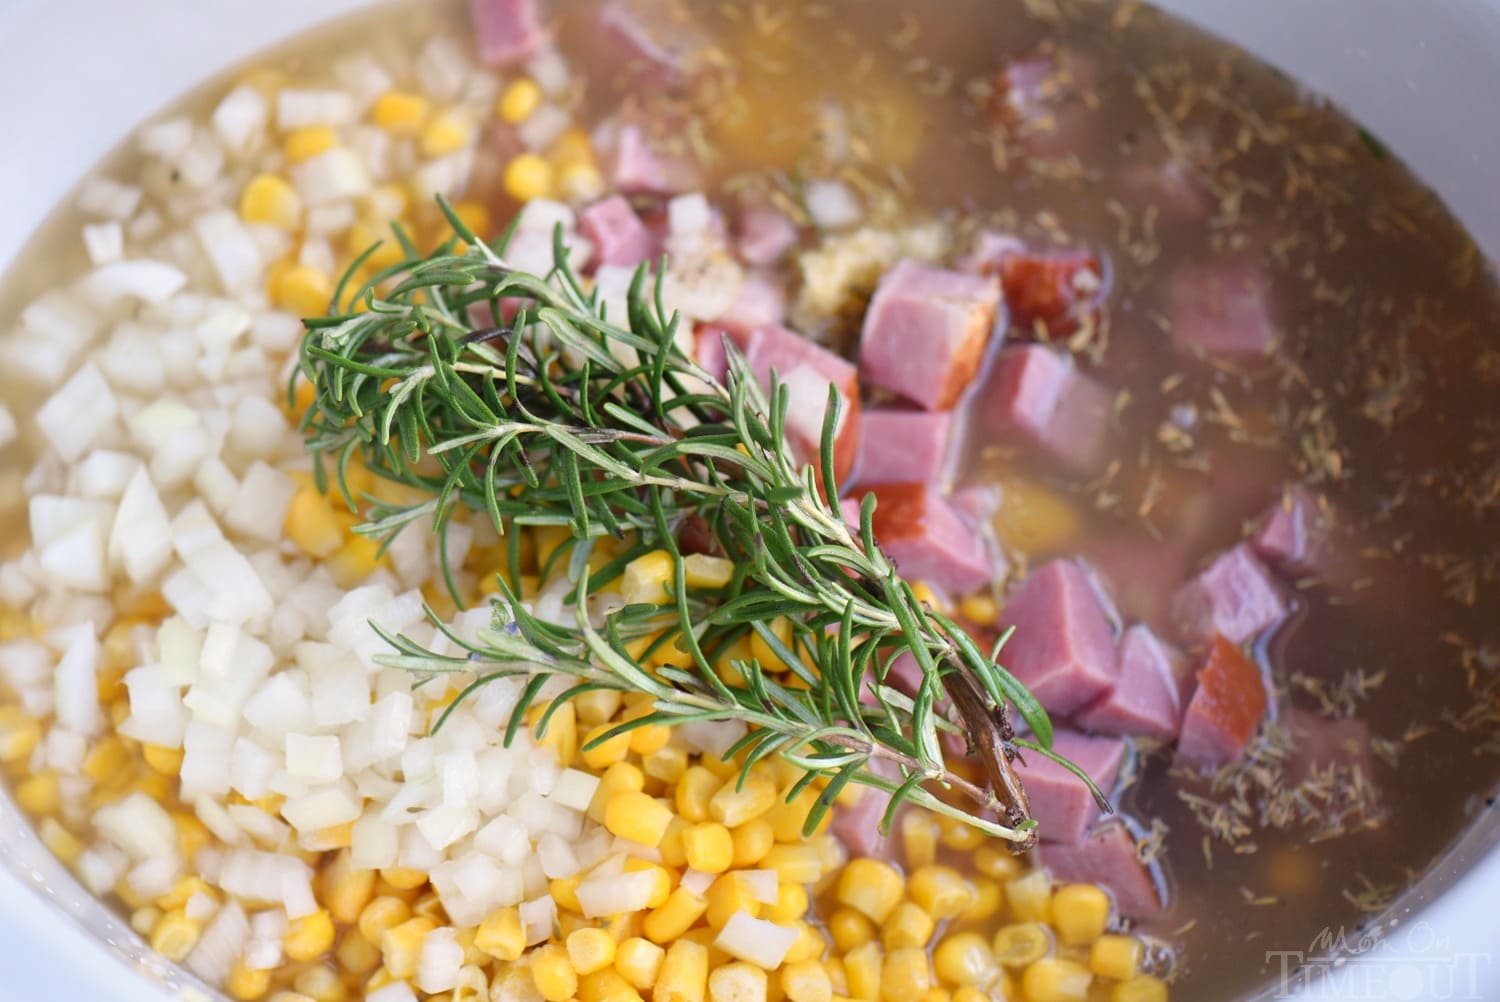 Love slow cooker recipes? This one is for you! This Slow Cooker Rosemary Potato Soup with Ham and Corn is all about filling your belly with goodness and warmth! Weeknight dinners have never tasted this good! // Mom On Timeout